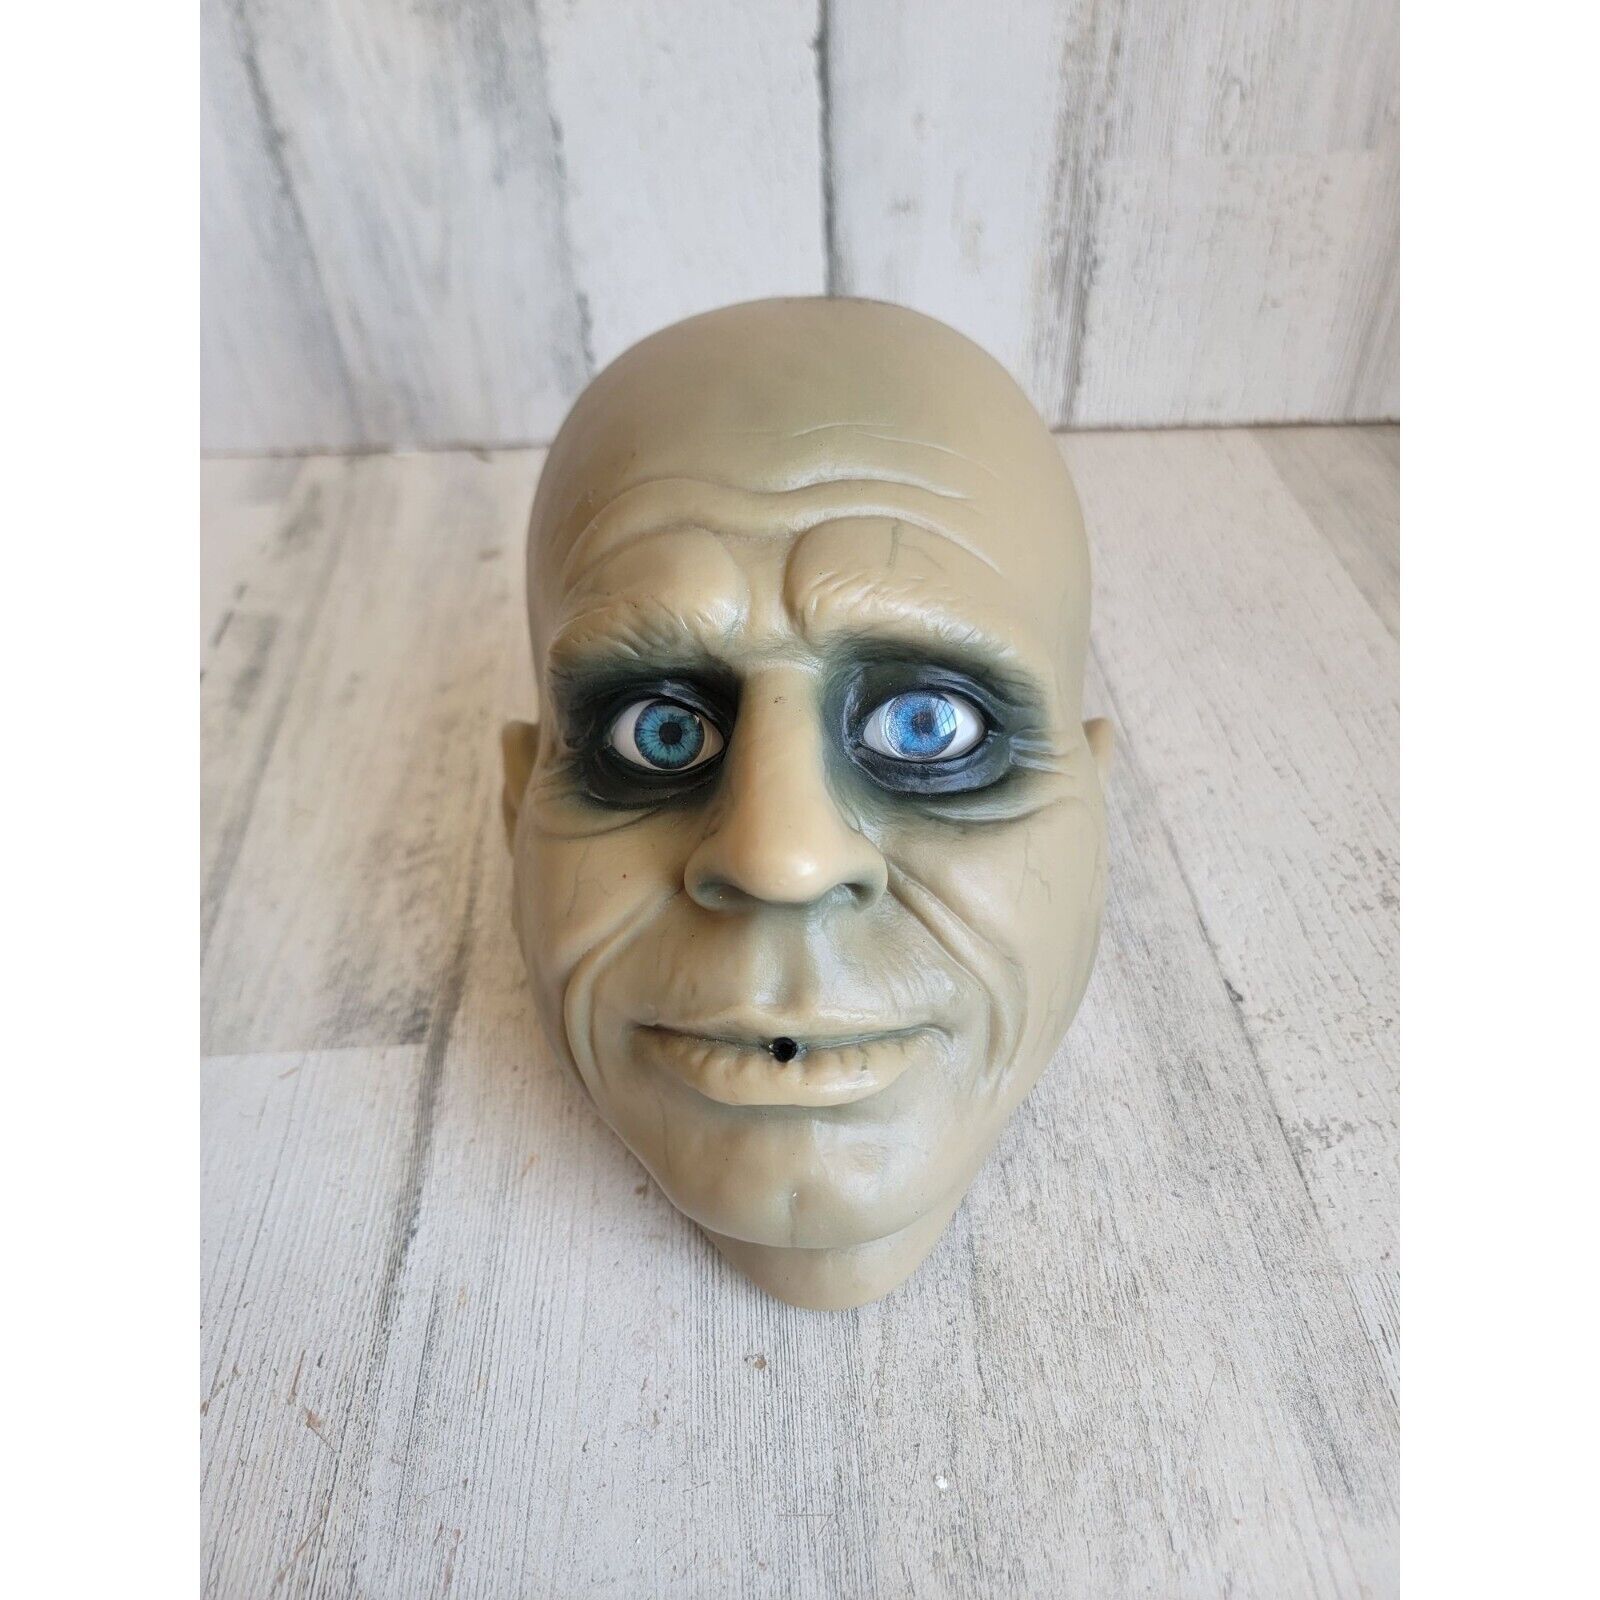 Gemmy uncle fester moving eye animated prop decor